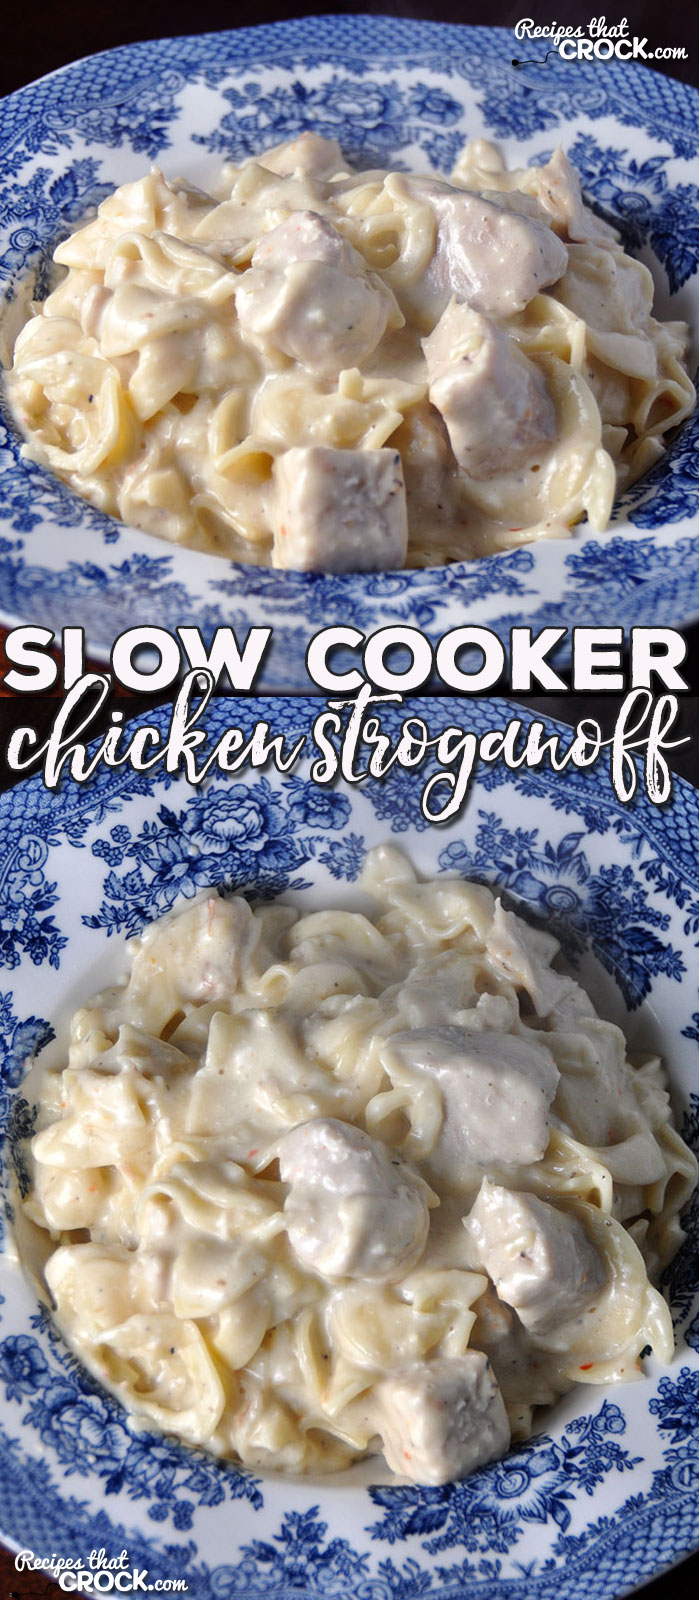 Do you want a delicious meal that is a snap to make and has even kids asking for more even after all the leftovers are gone? Then you don't want to miss this Slow Cooker Chicken Stroganoff submitted by one of our Crock Posse members!